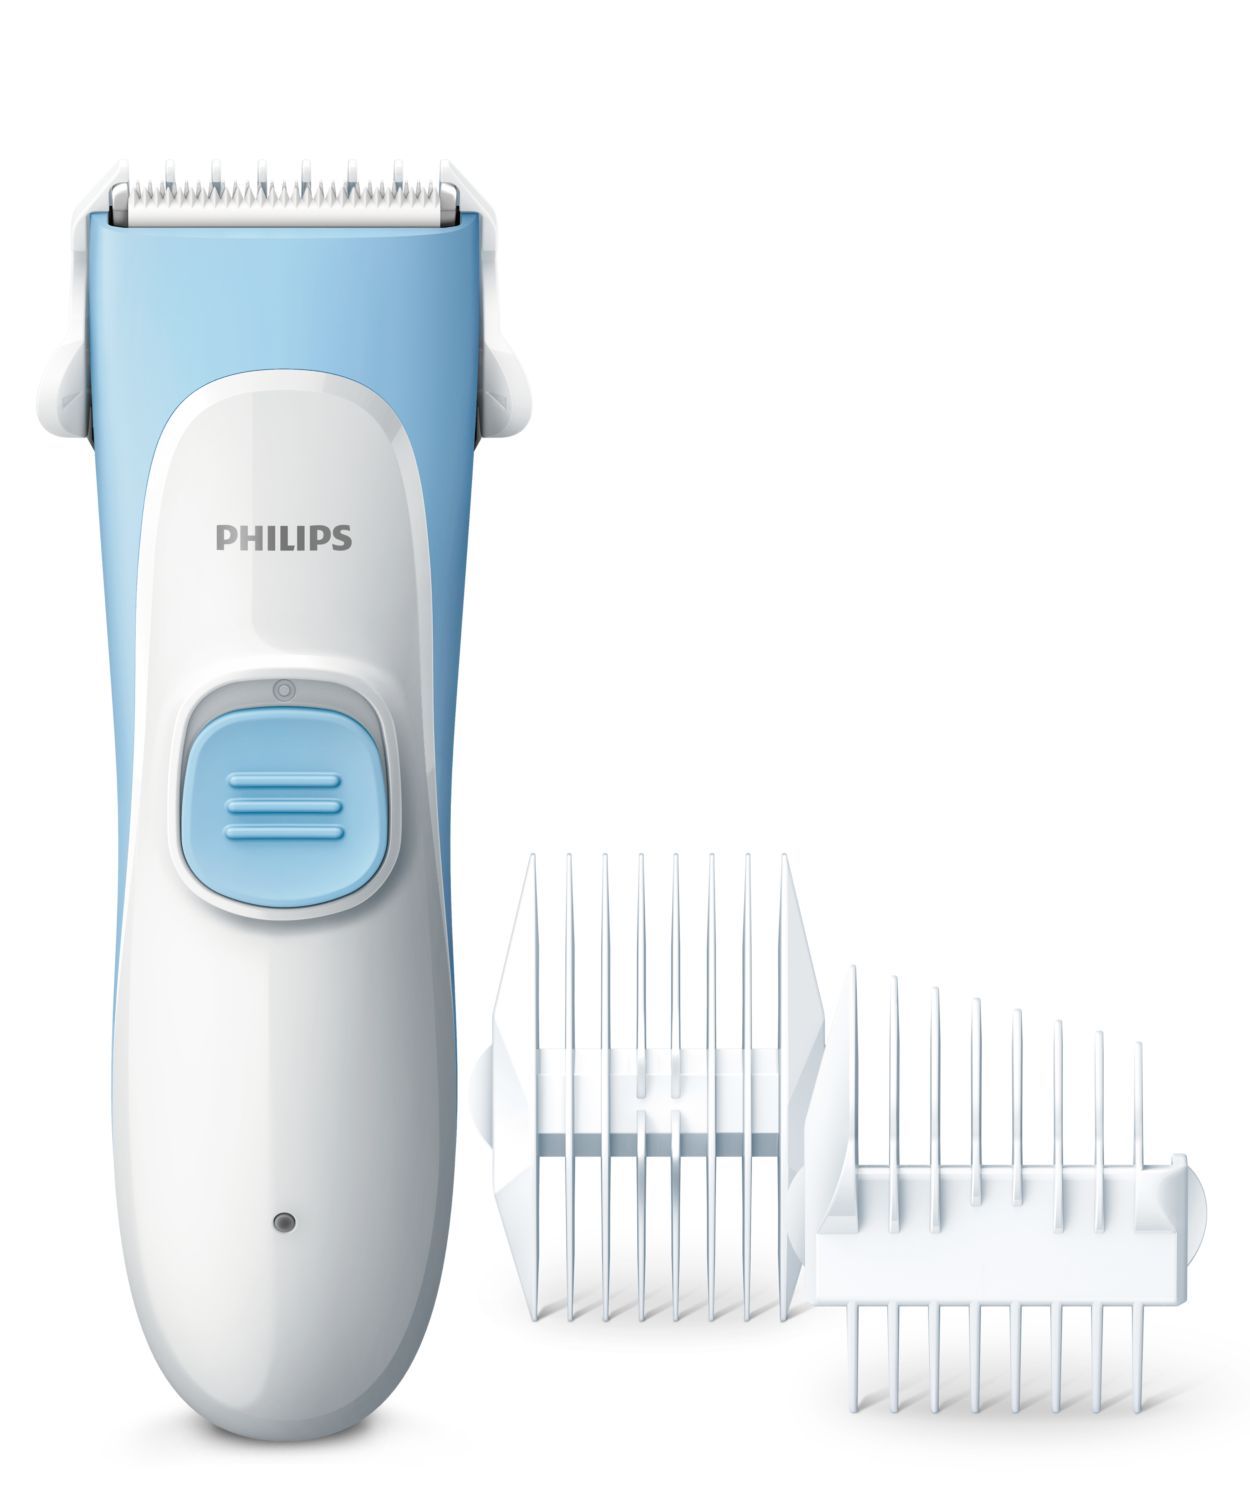 32 Top Photos Baby Hair Clipper : Enssu Kids Hair Trimmer Professional Cordless Quiet Hair Clipper For Baby Children Infant Haircut With Waterproof Ultra Slient China Baby Appliances Products Manufacturer